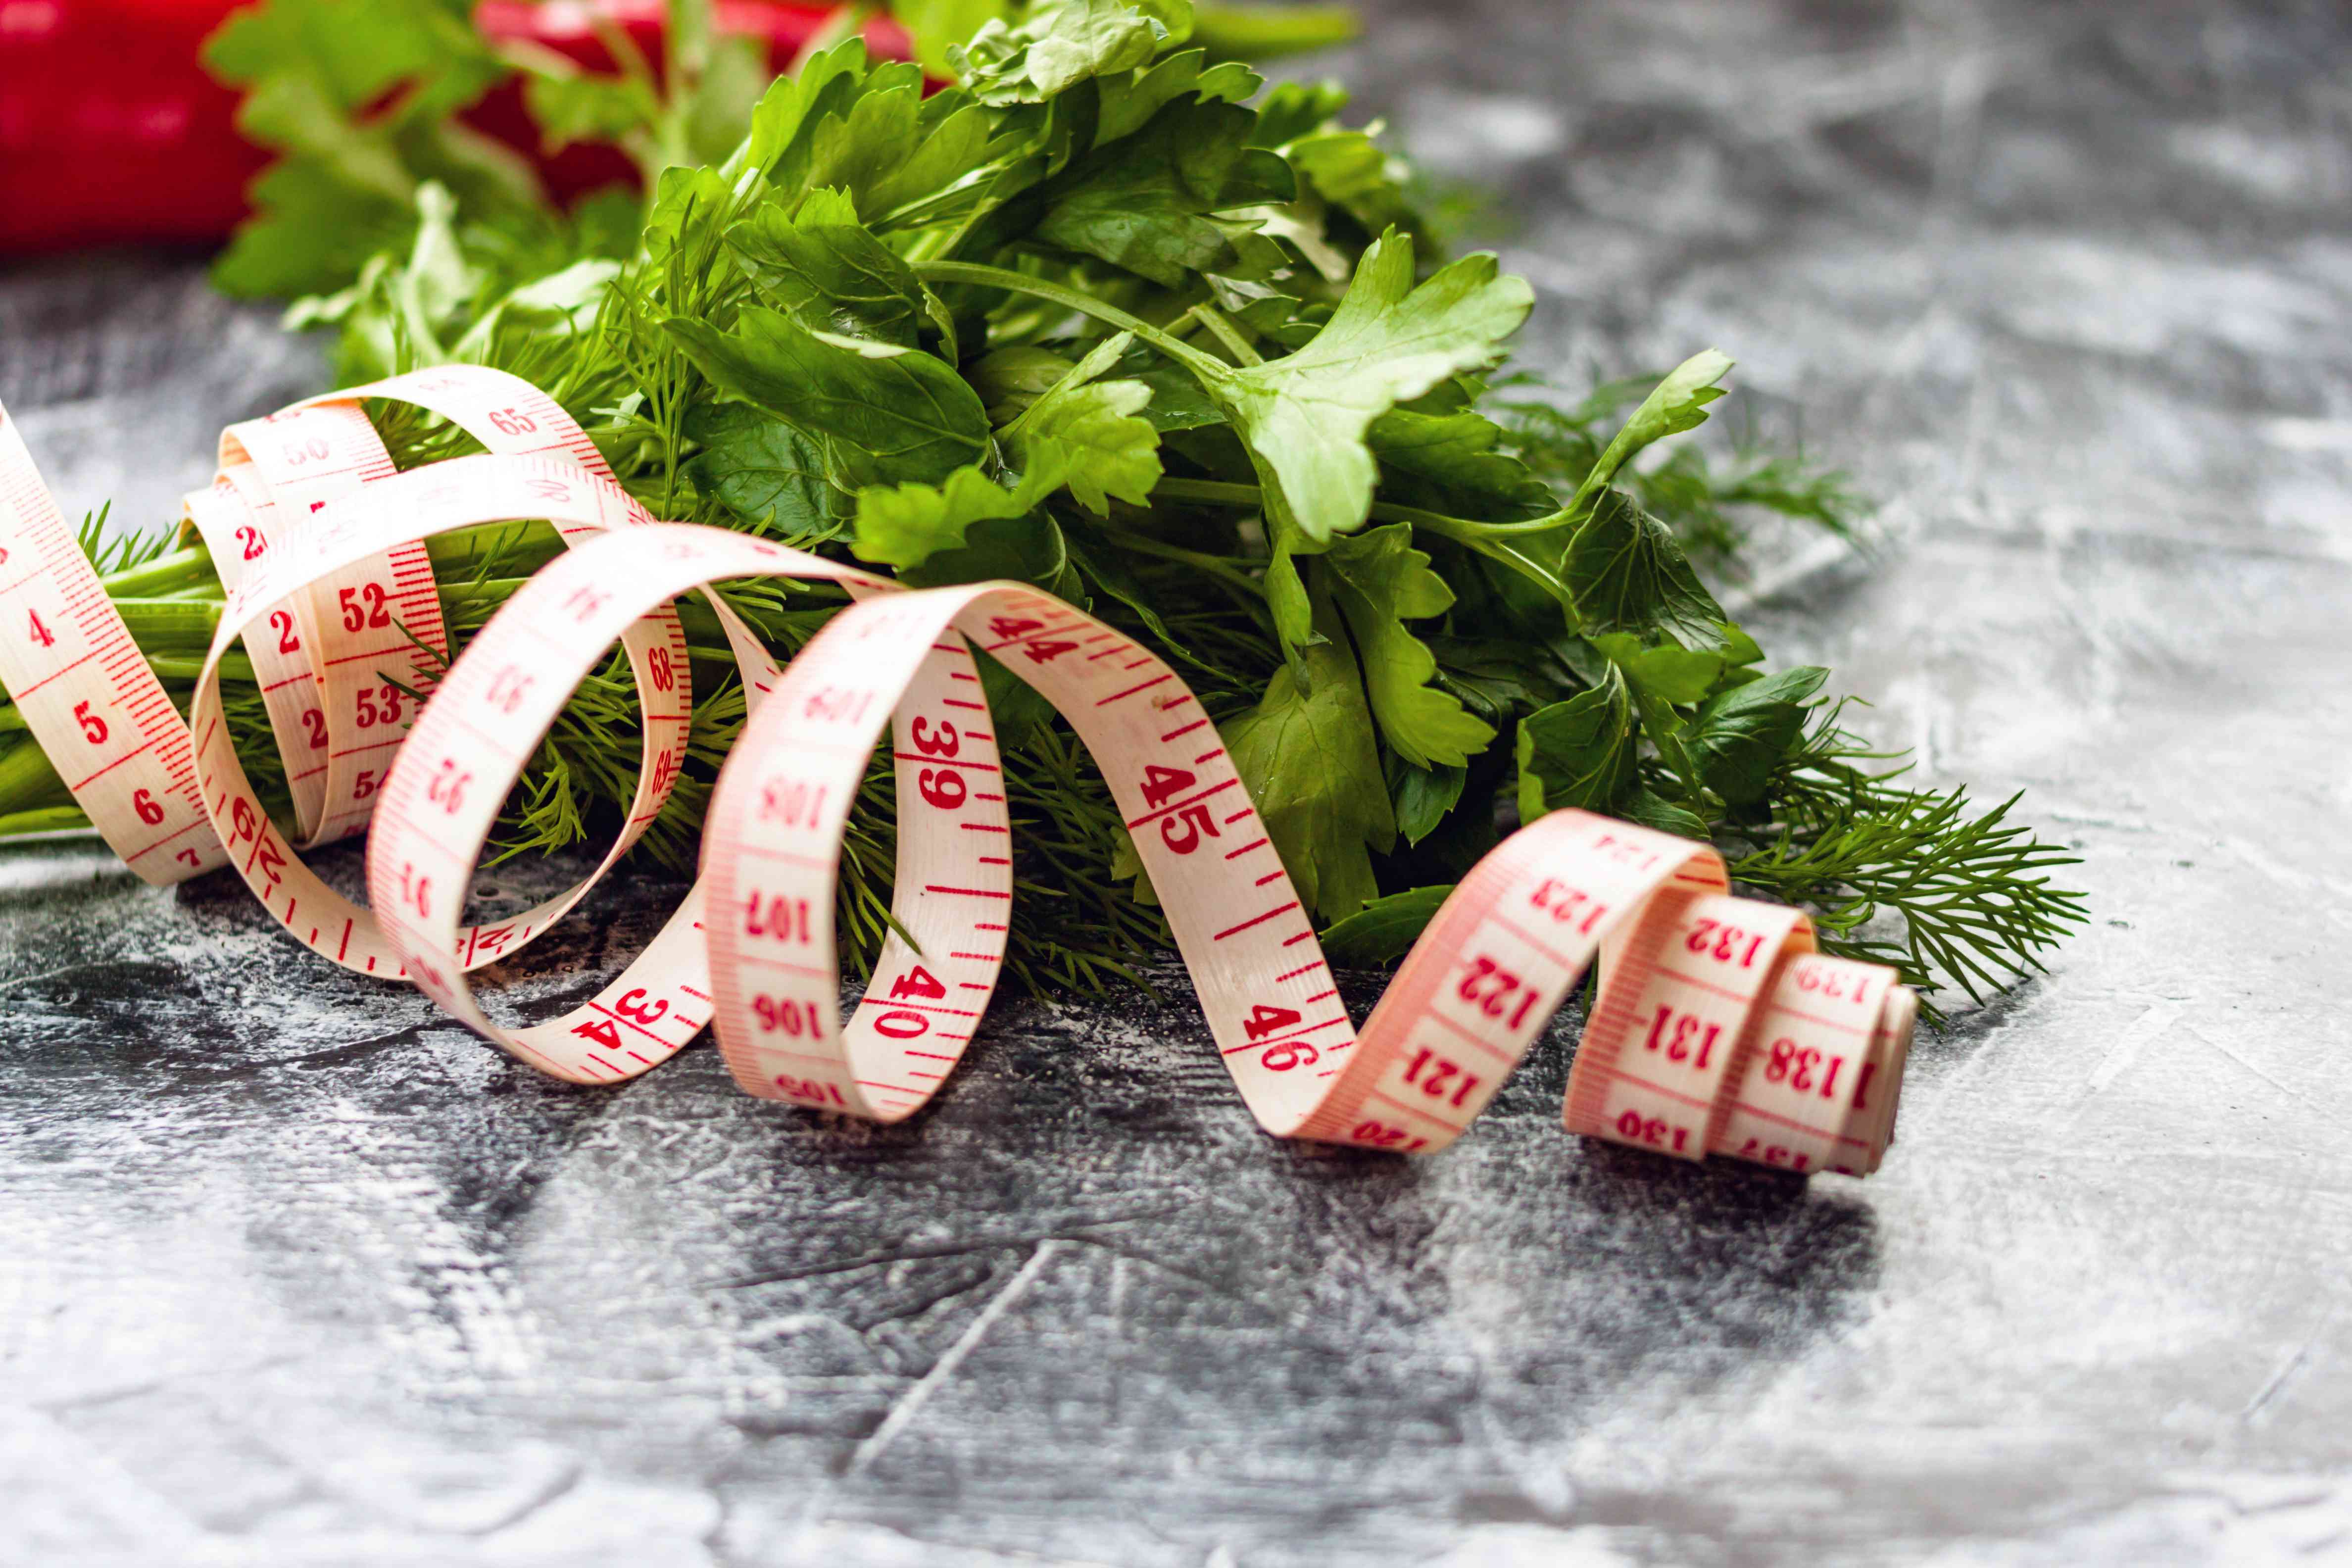 13 Herbs That Can Help You Lose Weight